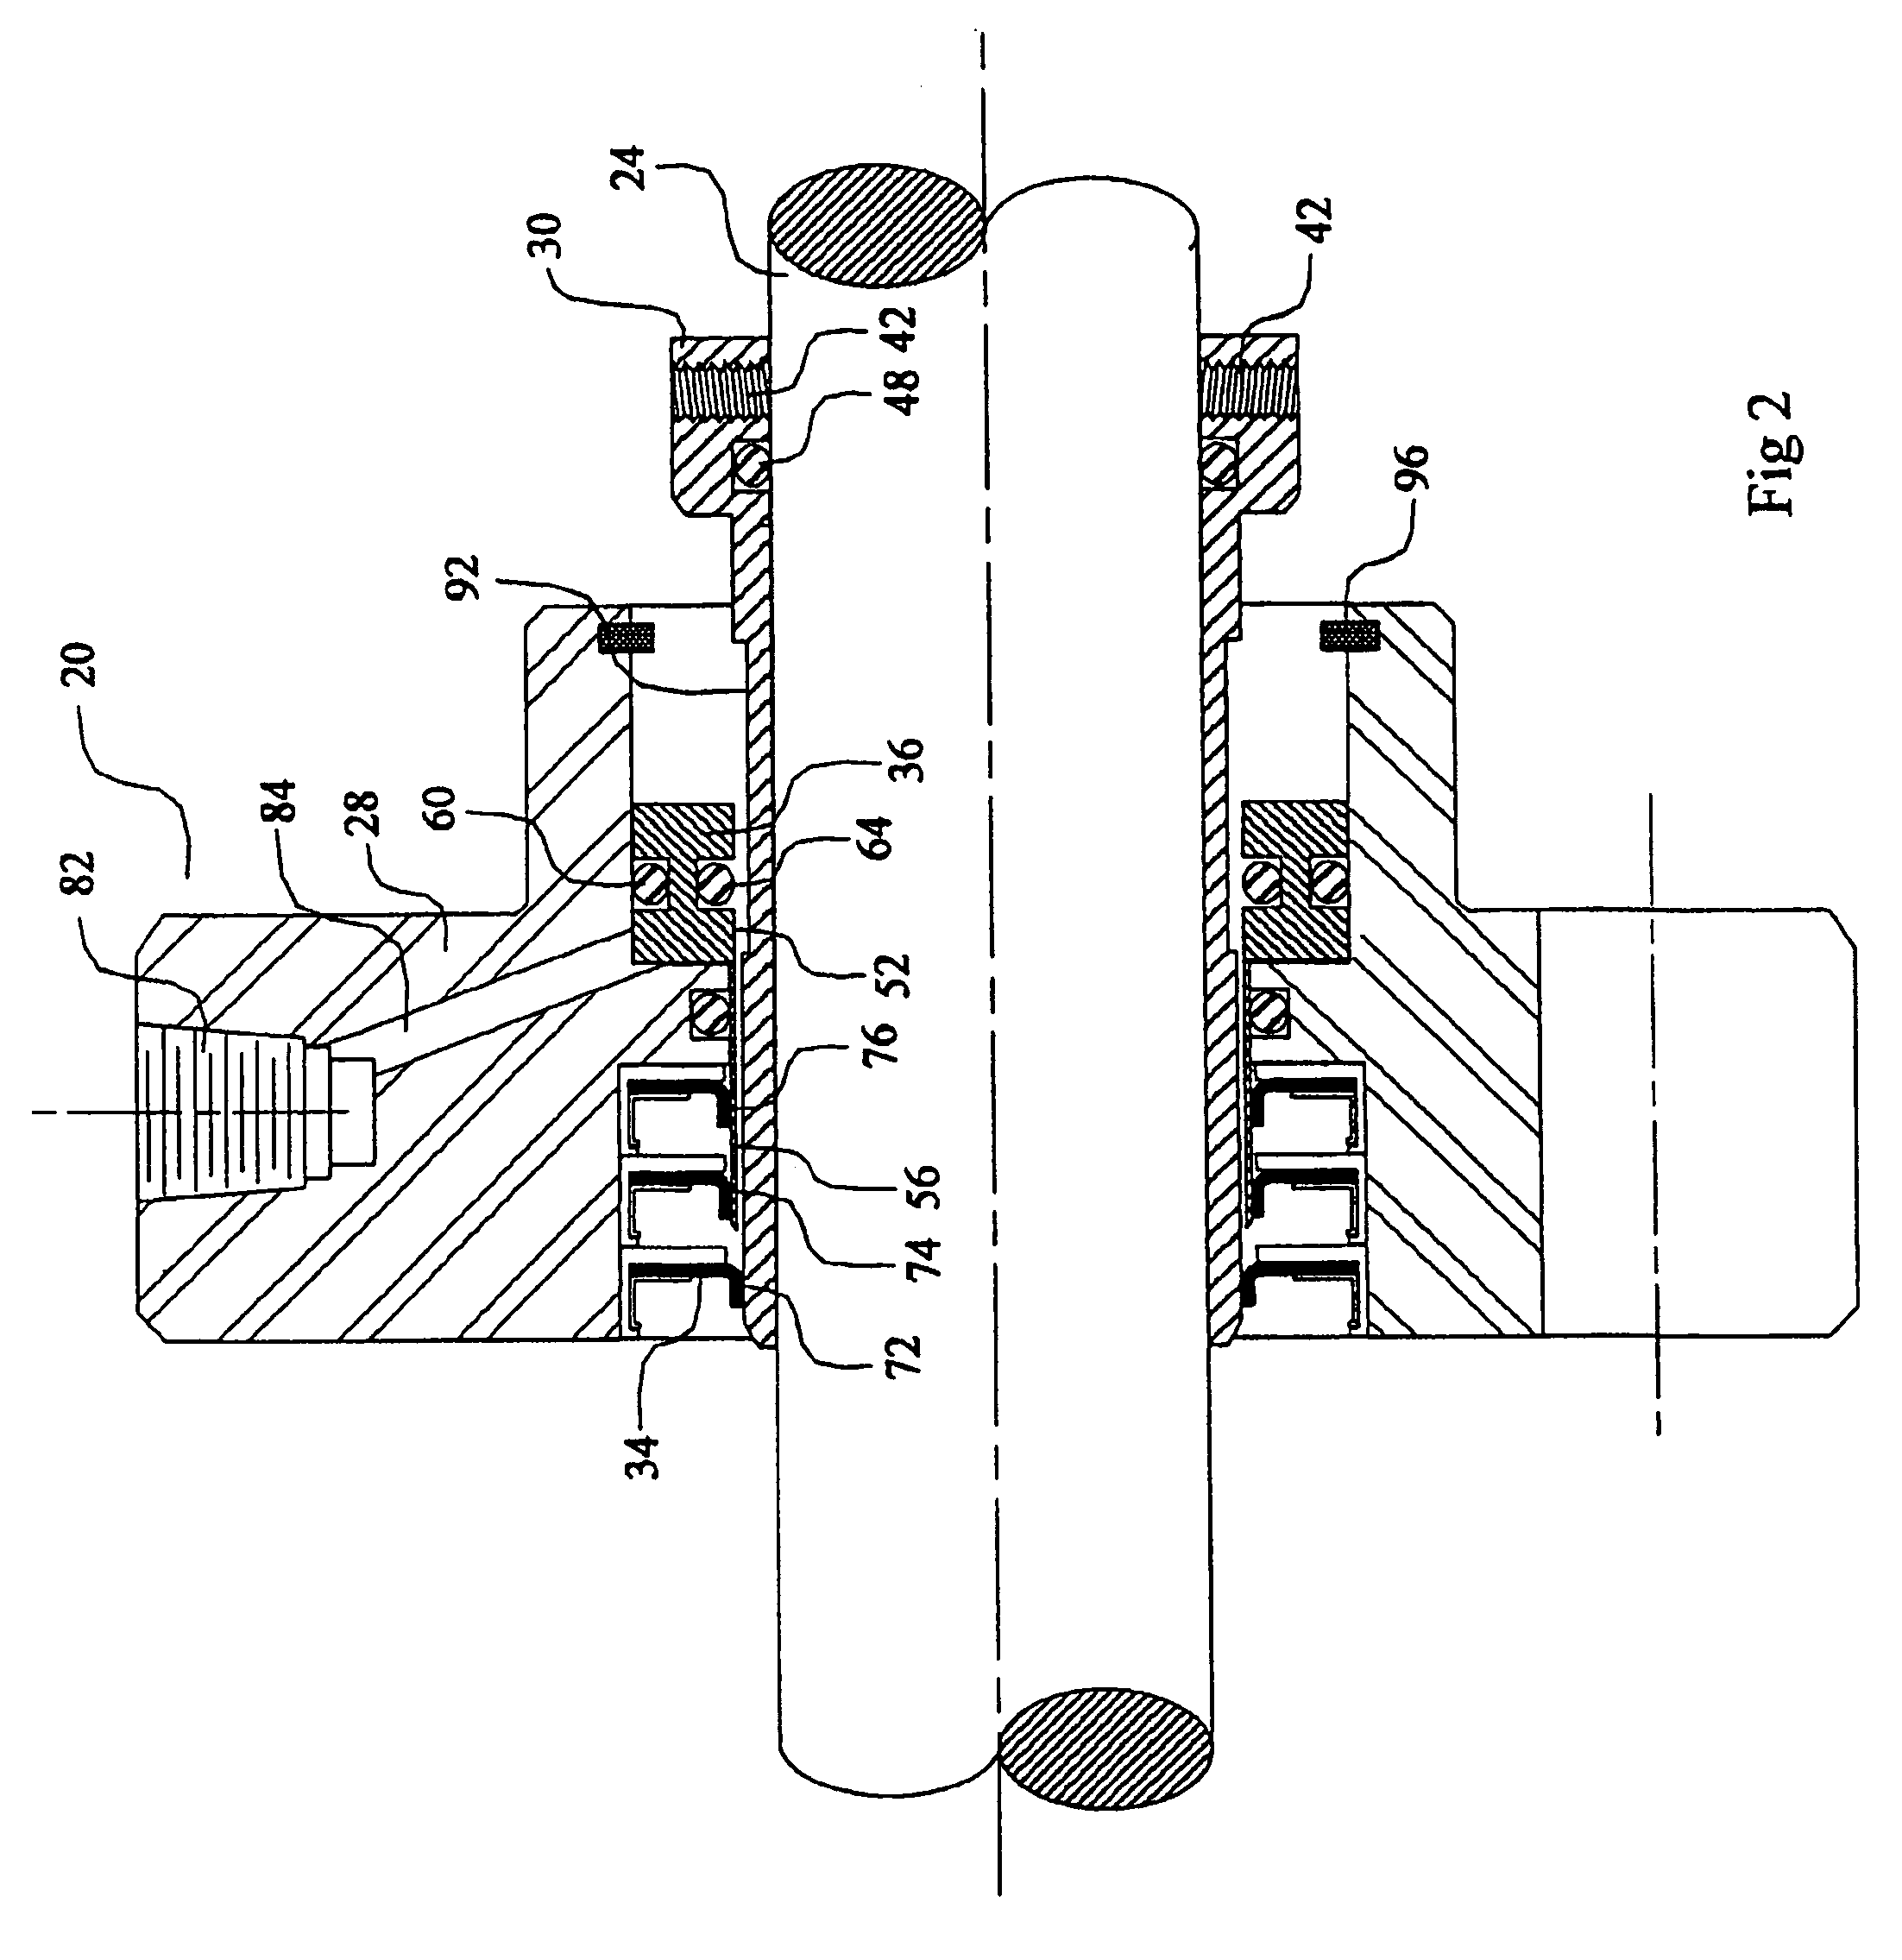 Sealing apparatus having sequentially engageable seals